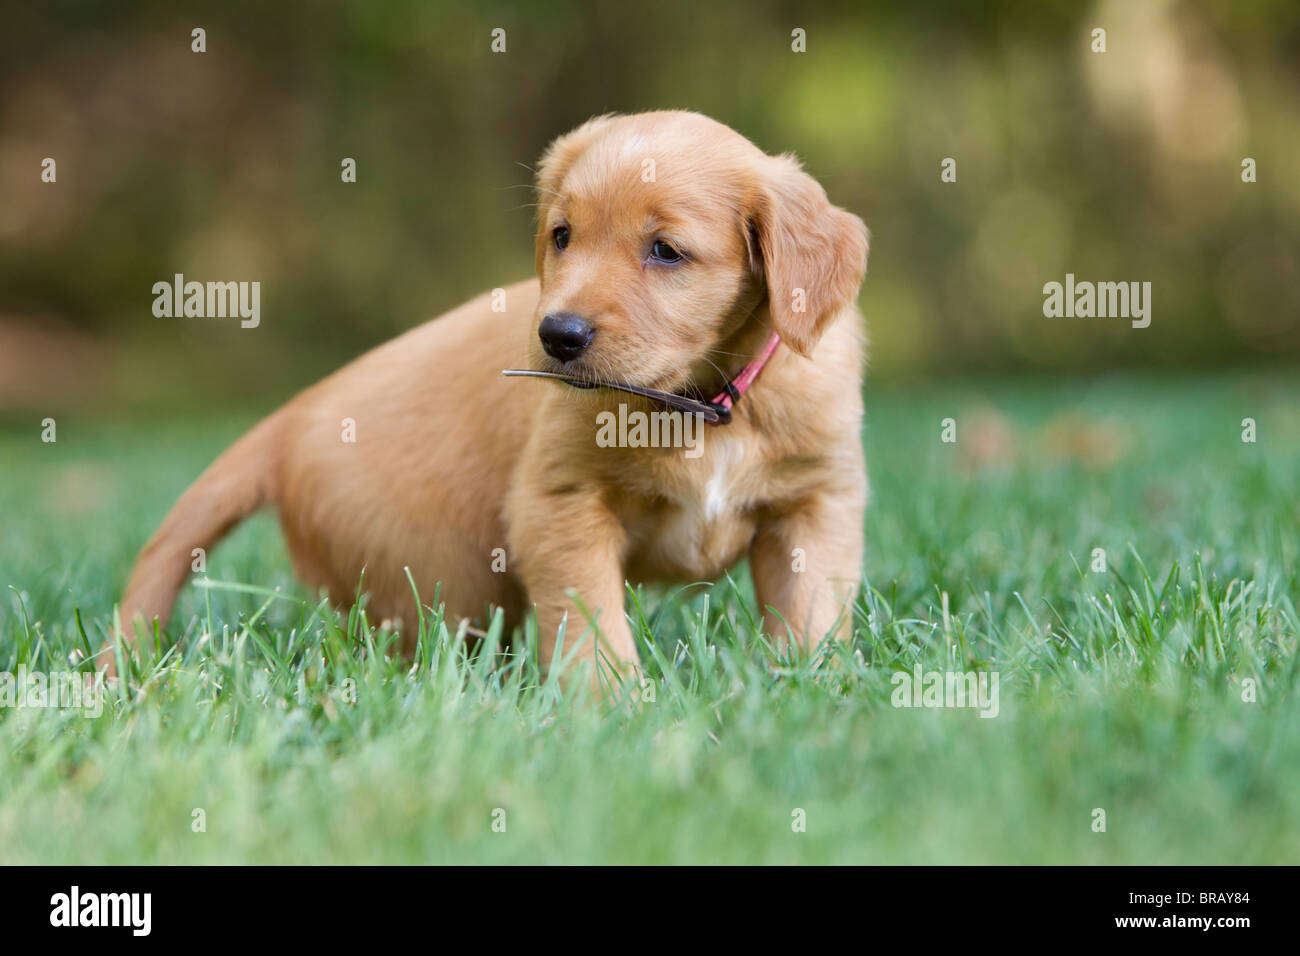 A 7 Week Old Golden Retriever Puppy Holding A Feather In Its Mouth Stock Photo Alamy